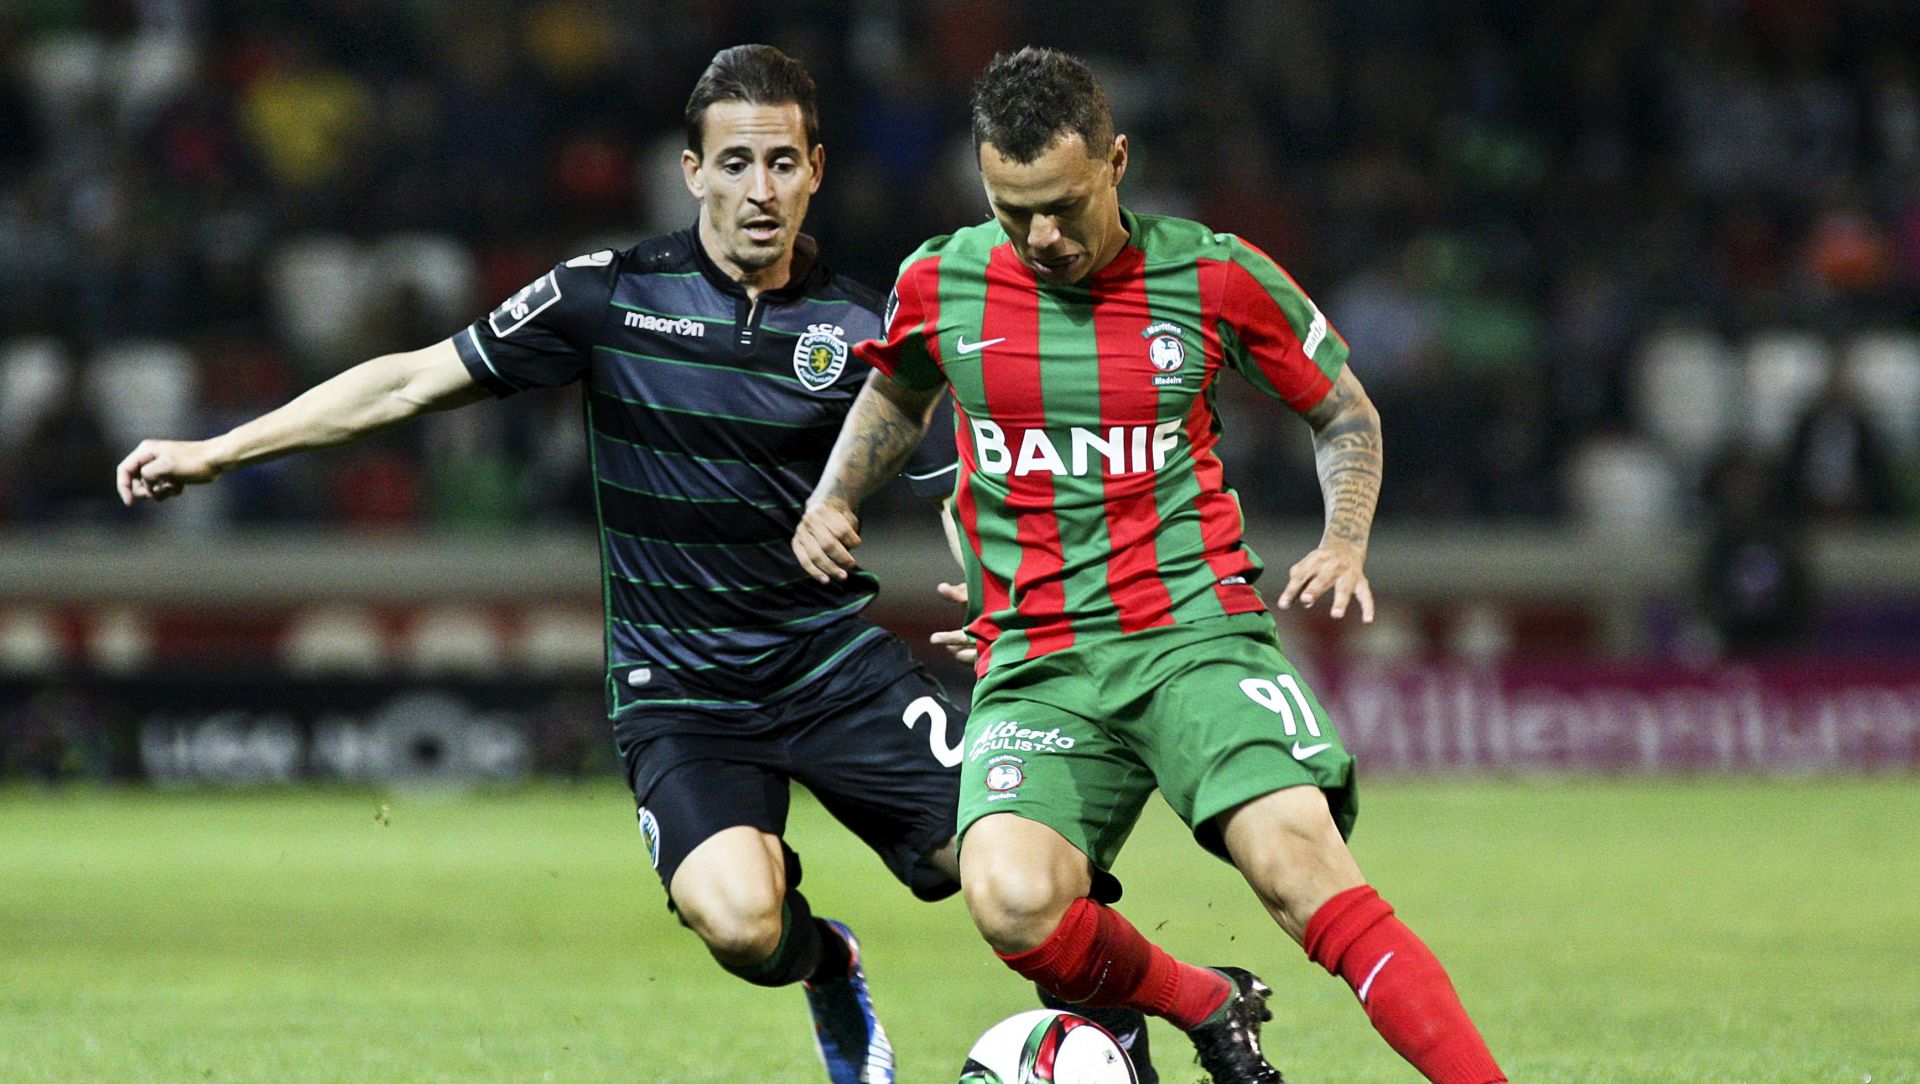 epa05056157 Maritimo's Patrick Vieira (L) vies for the ball with Sporting's Joao Pereira during their Portuguese First League soccer match held at Barreiros Stadium in Funchal, Portugal, 05 December 2015.  EPA/HOMEM DE GOUVEIA